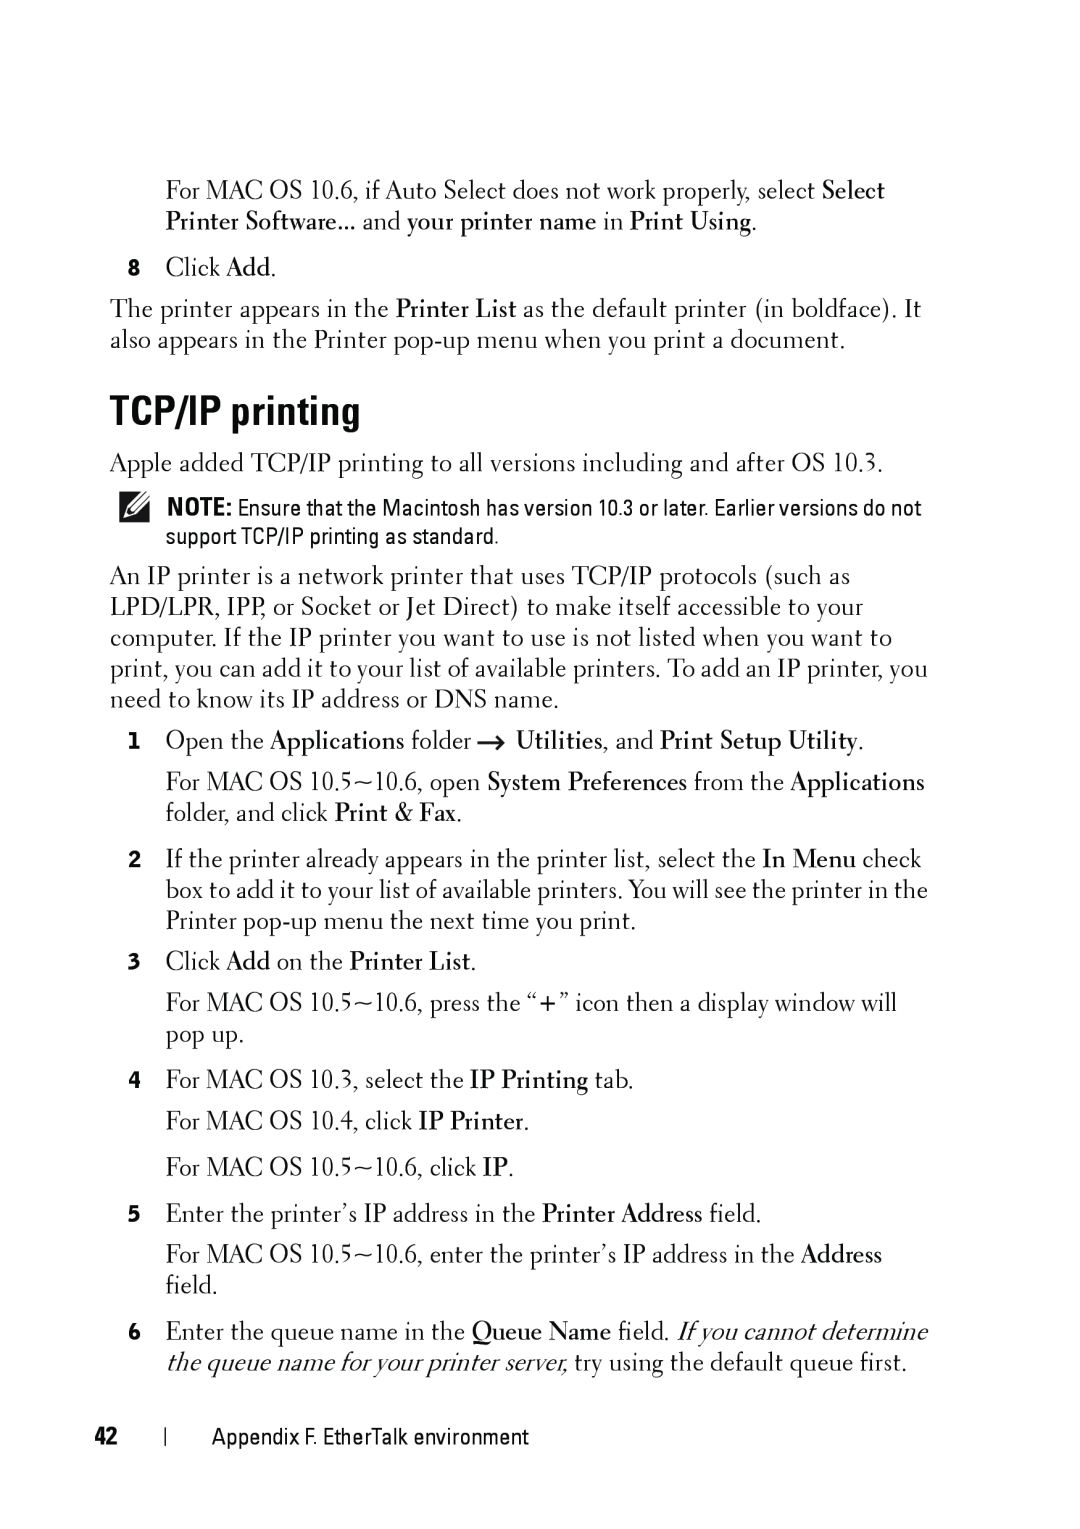 Dell 5002 TCP/IP printing, Open the Applications folder Utilities, and Print Setup Utility, Click Add on the Printer List 